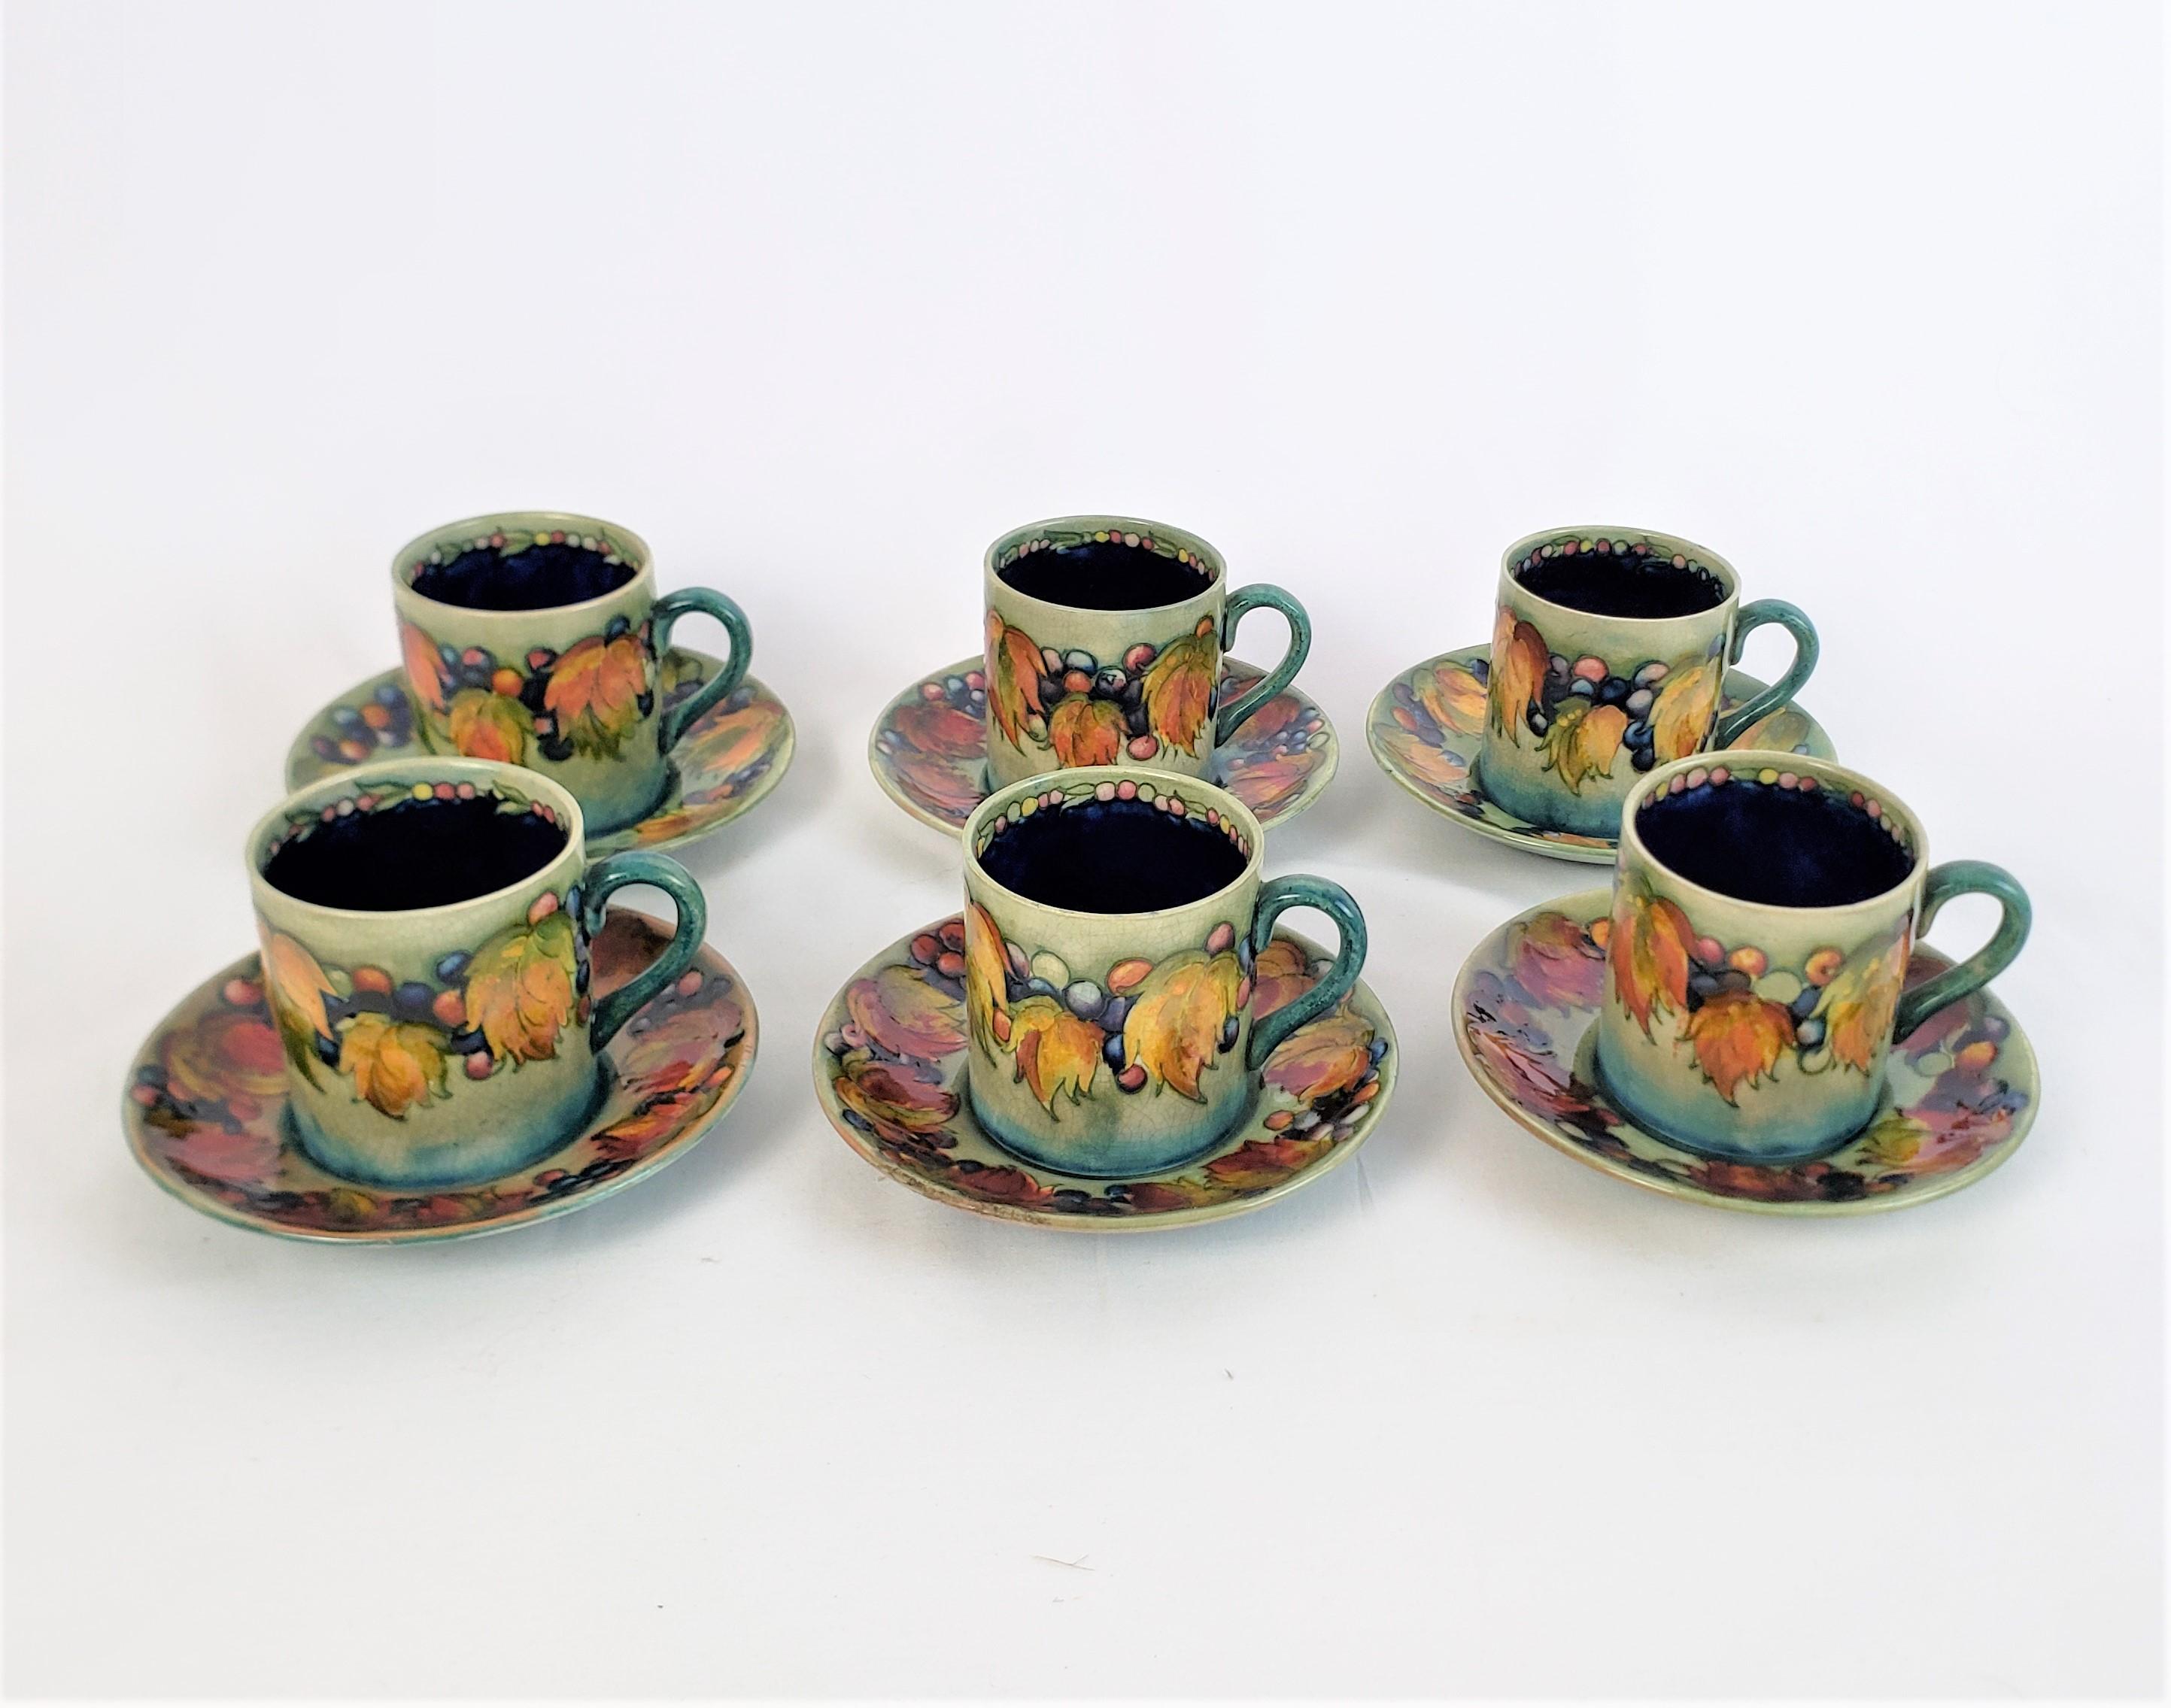 This set of six demitasse cups and saucers were made by the renowned Moorcroft factory of England in approximately 1940 in their signature Leaf and Berry pattern. The cups are done with a green ground with cobalt blue interior and four of the